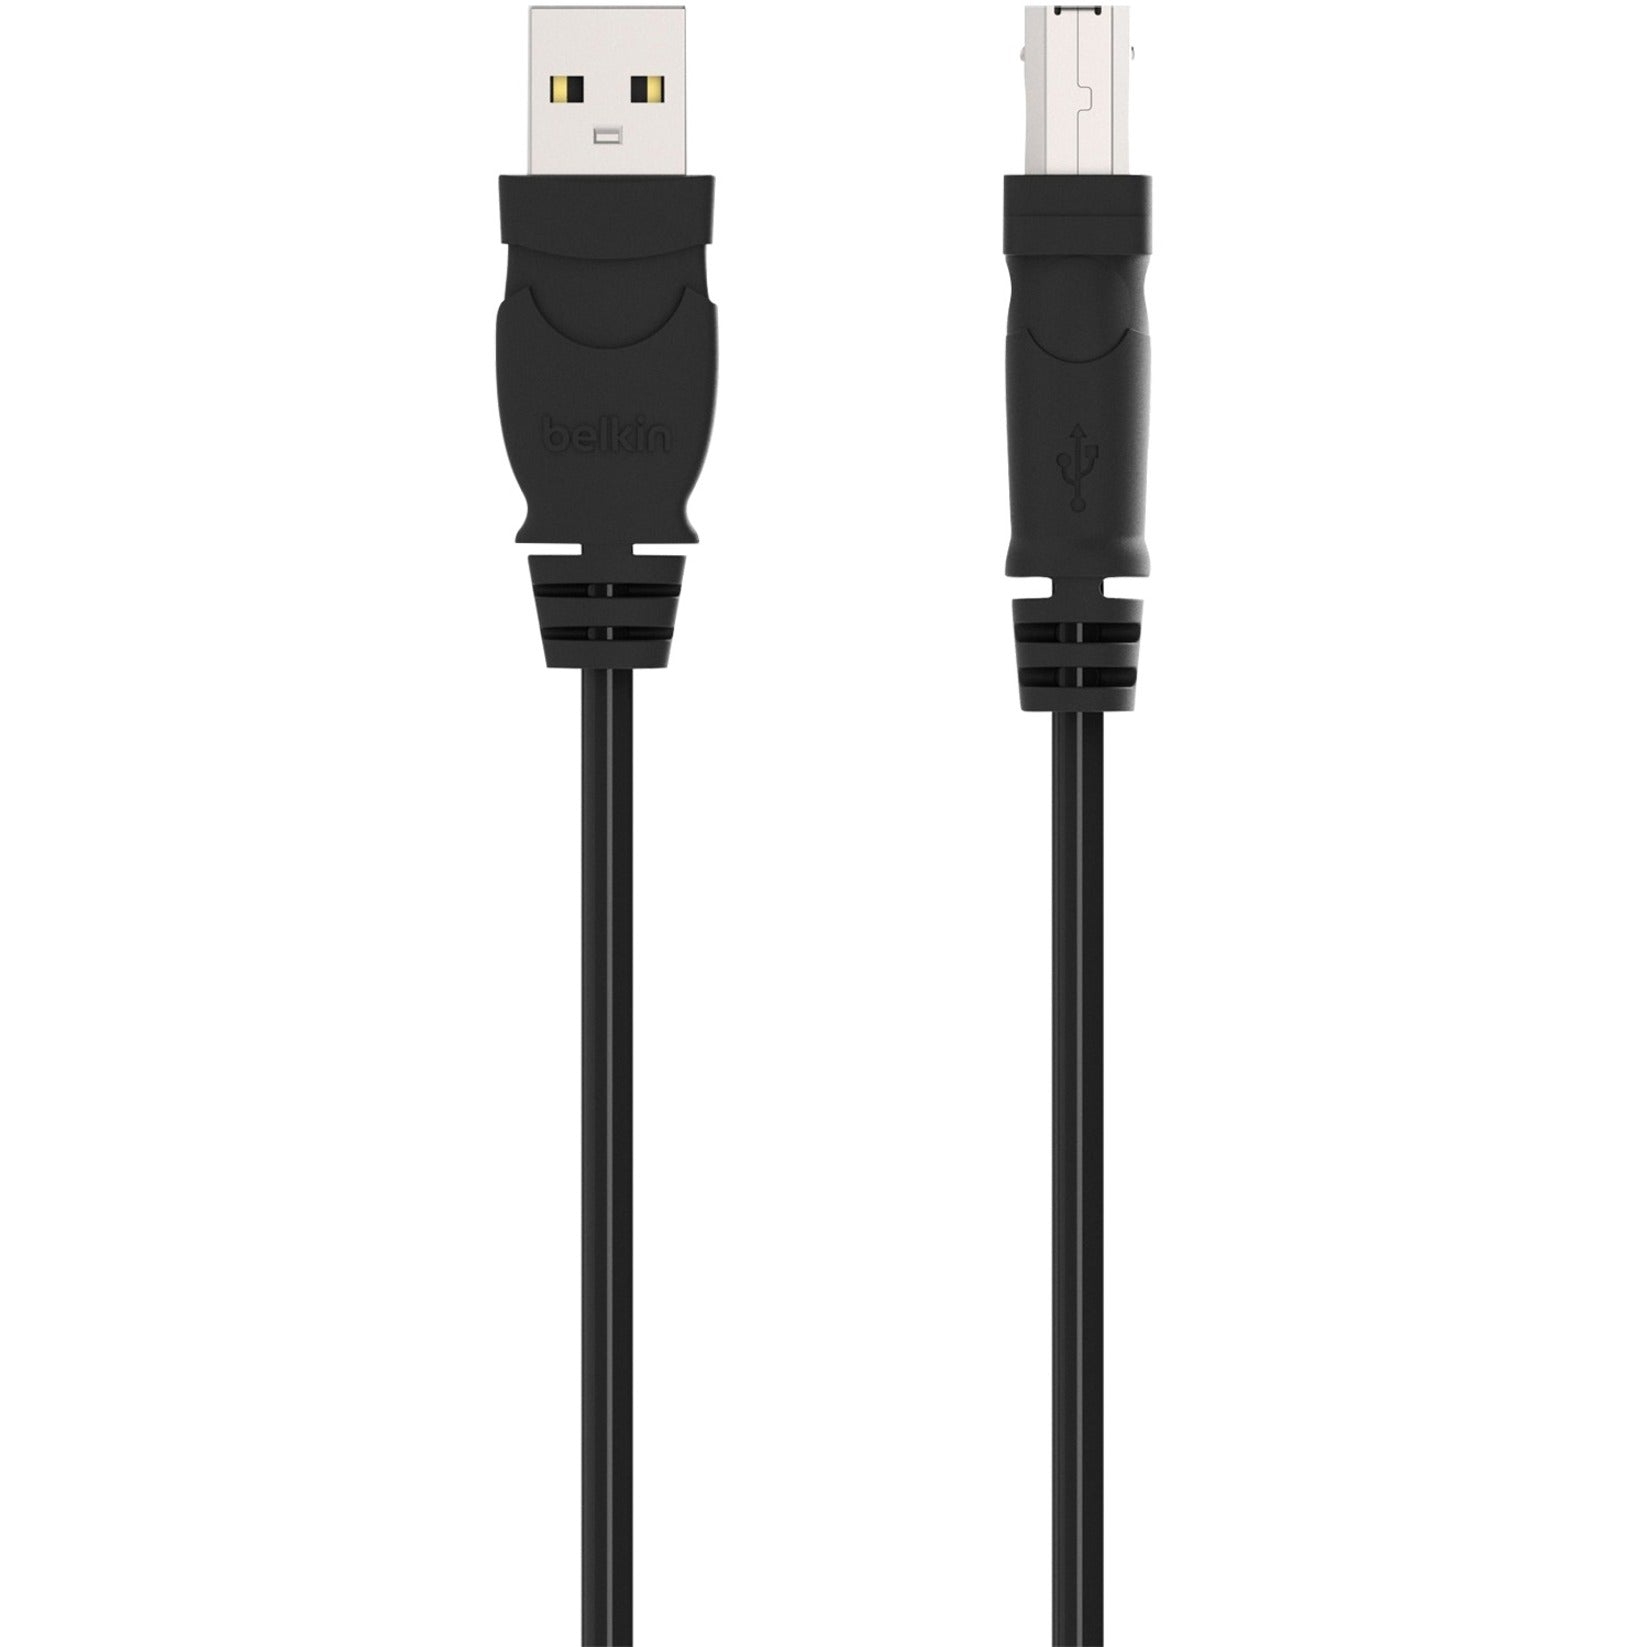 Belkin F3U133B06 Hi-Speed USB 2.0 Cable, 6 ft Data Transfer Cable